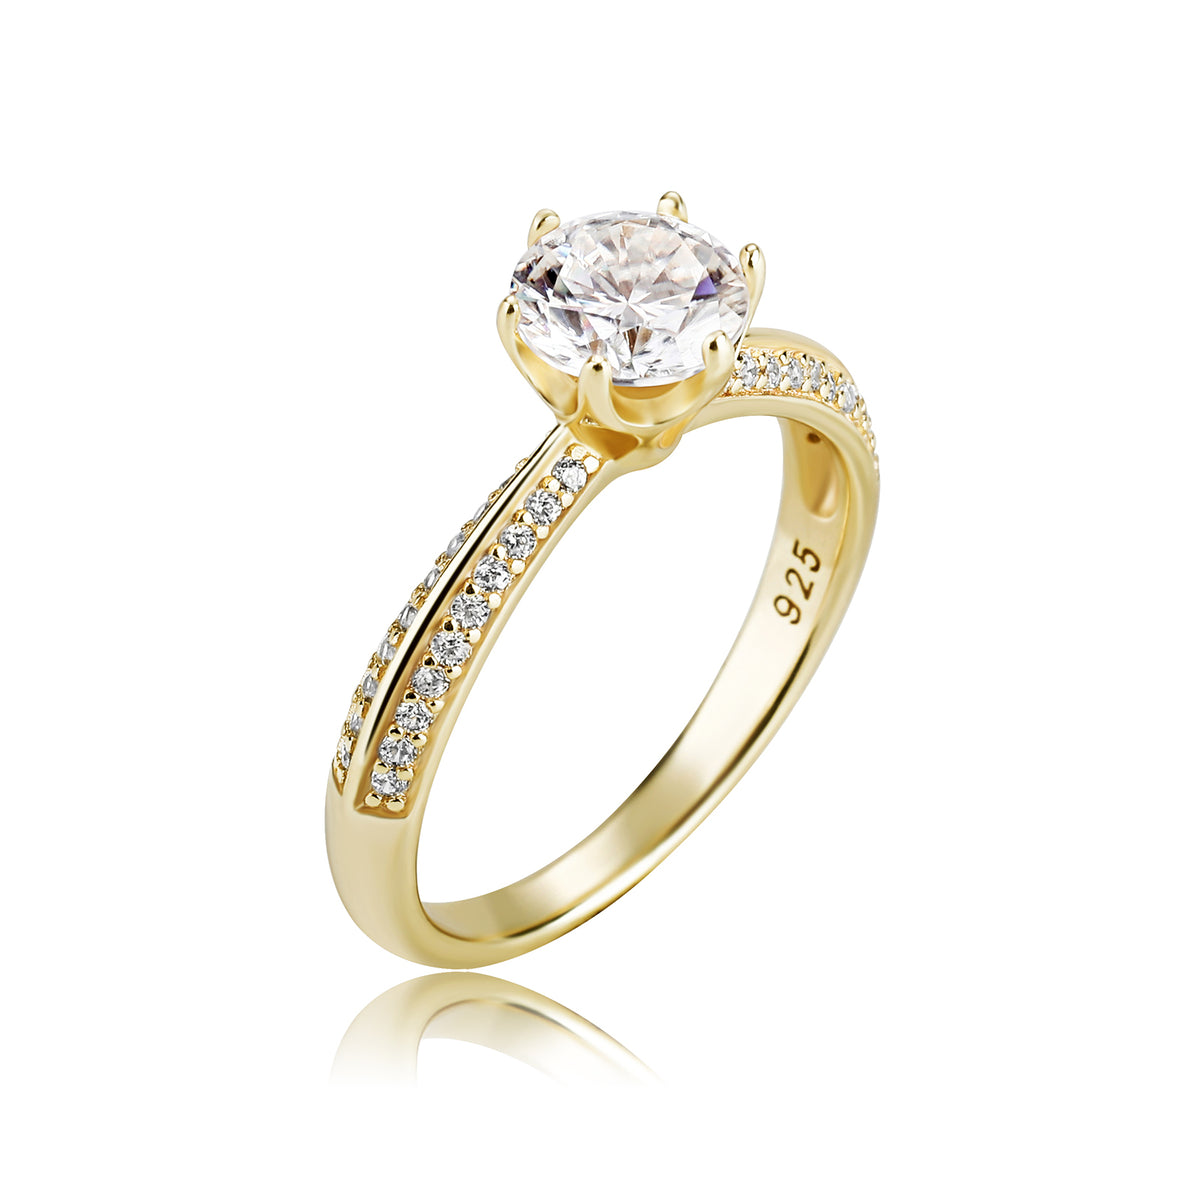 2 Row Accented Round Cut Moissanite Diamond Ring in Yellow/White Gold